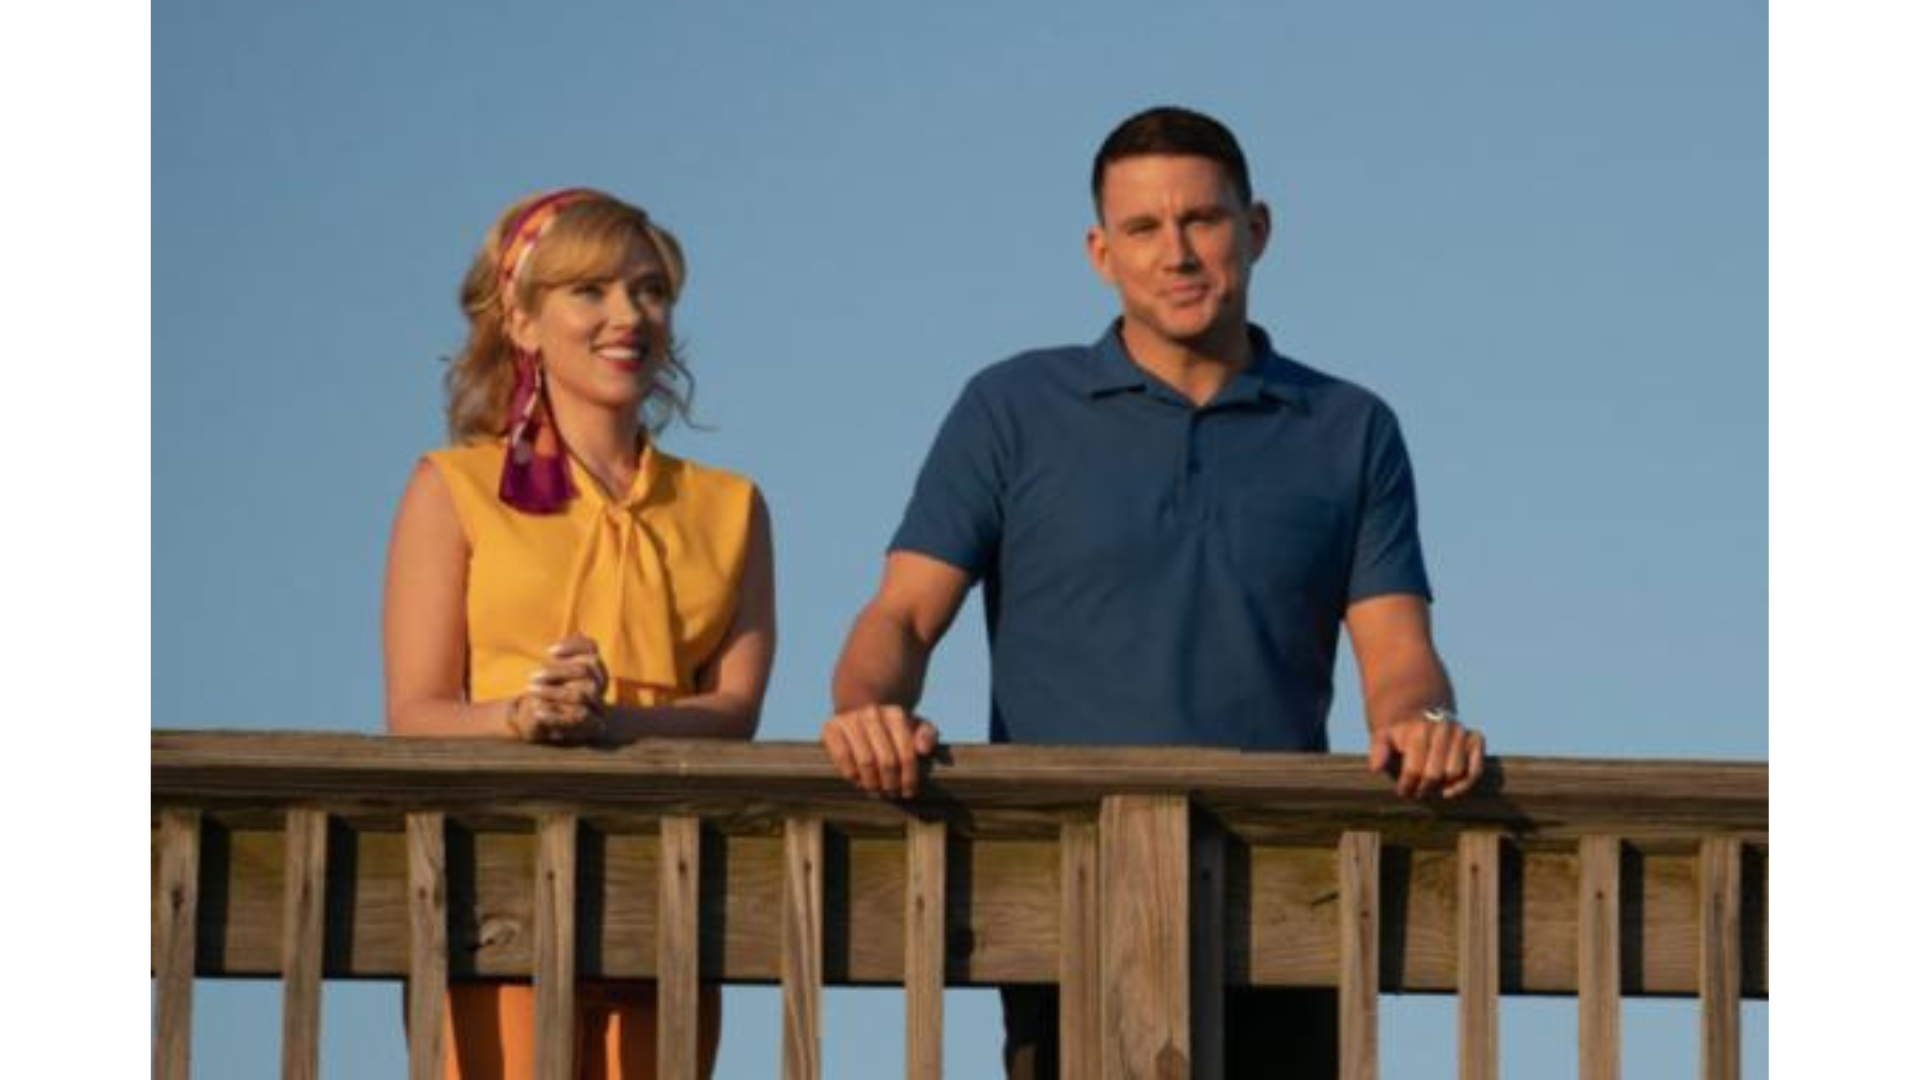 scarlett johansson and channing tatum star in fly me to the moon photo apple sony